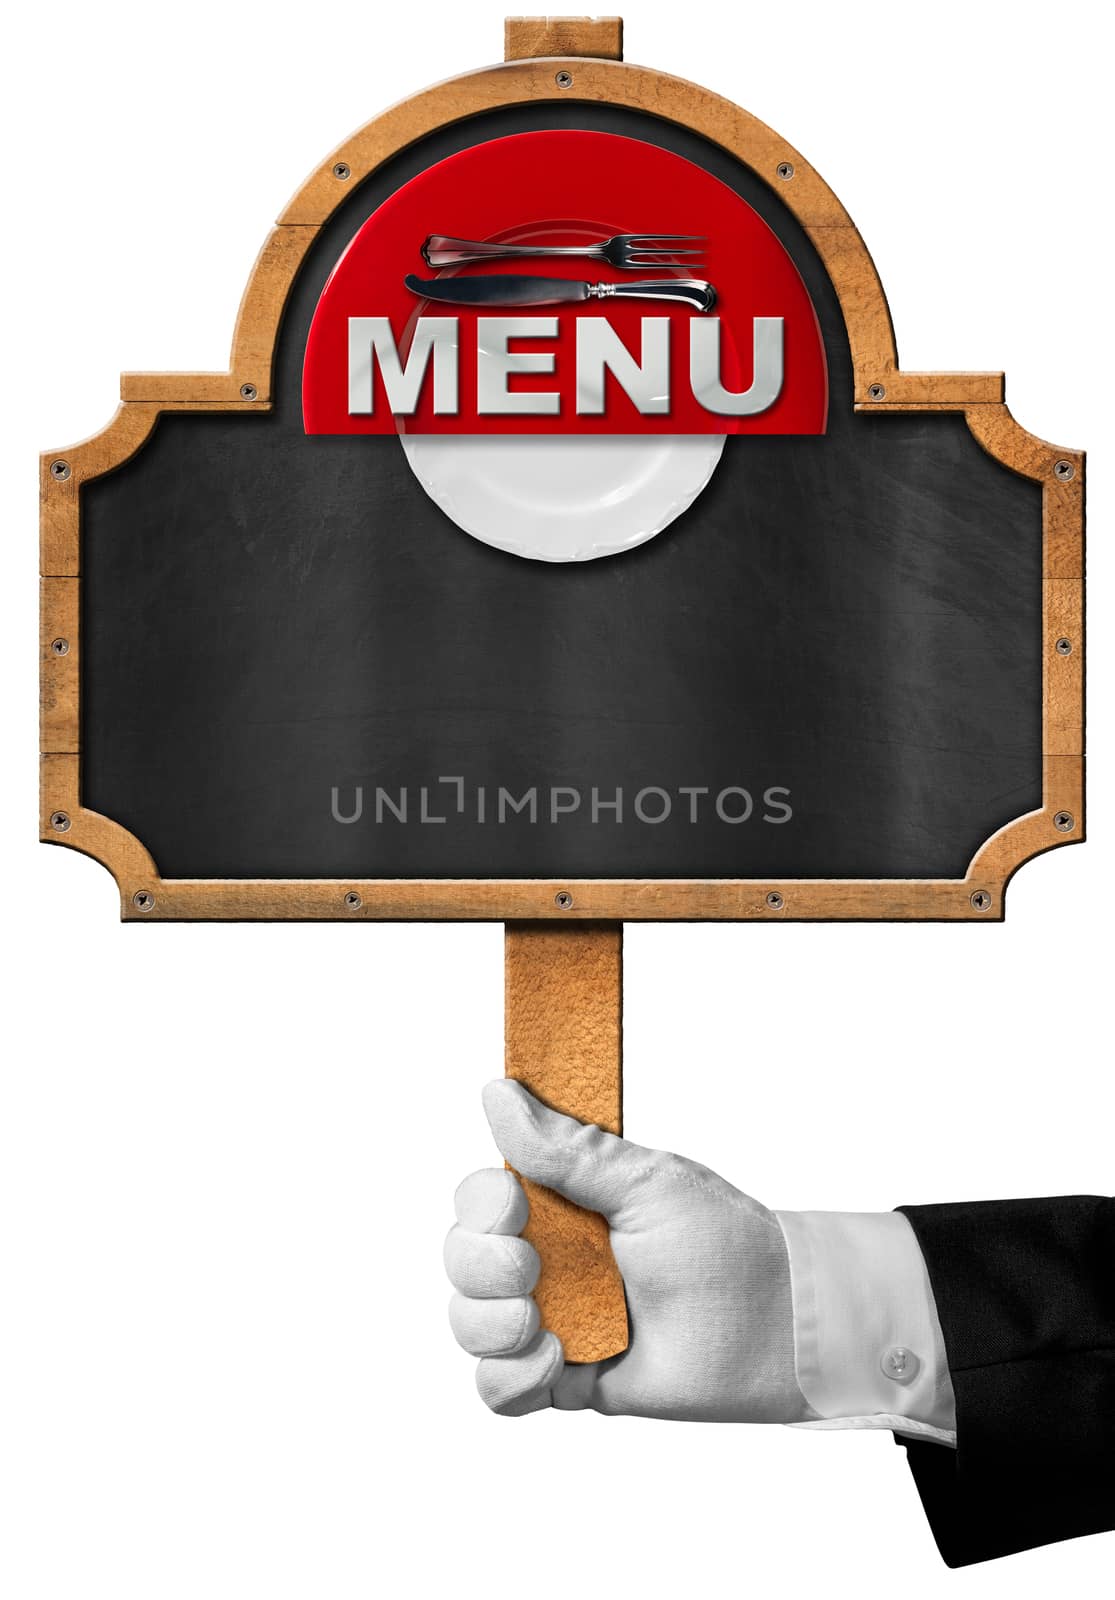 Hand of waiter with white glove holding a pole with empty blackboard, red and white plate with silver cutlery and text menu. Isolated on a white background